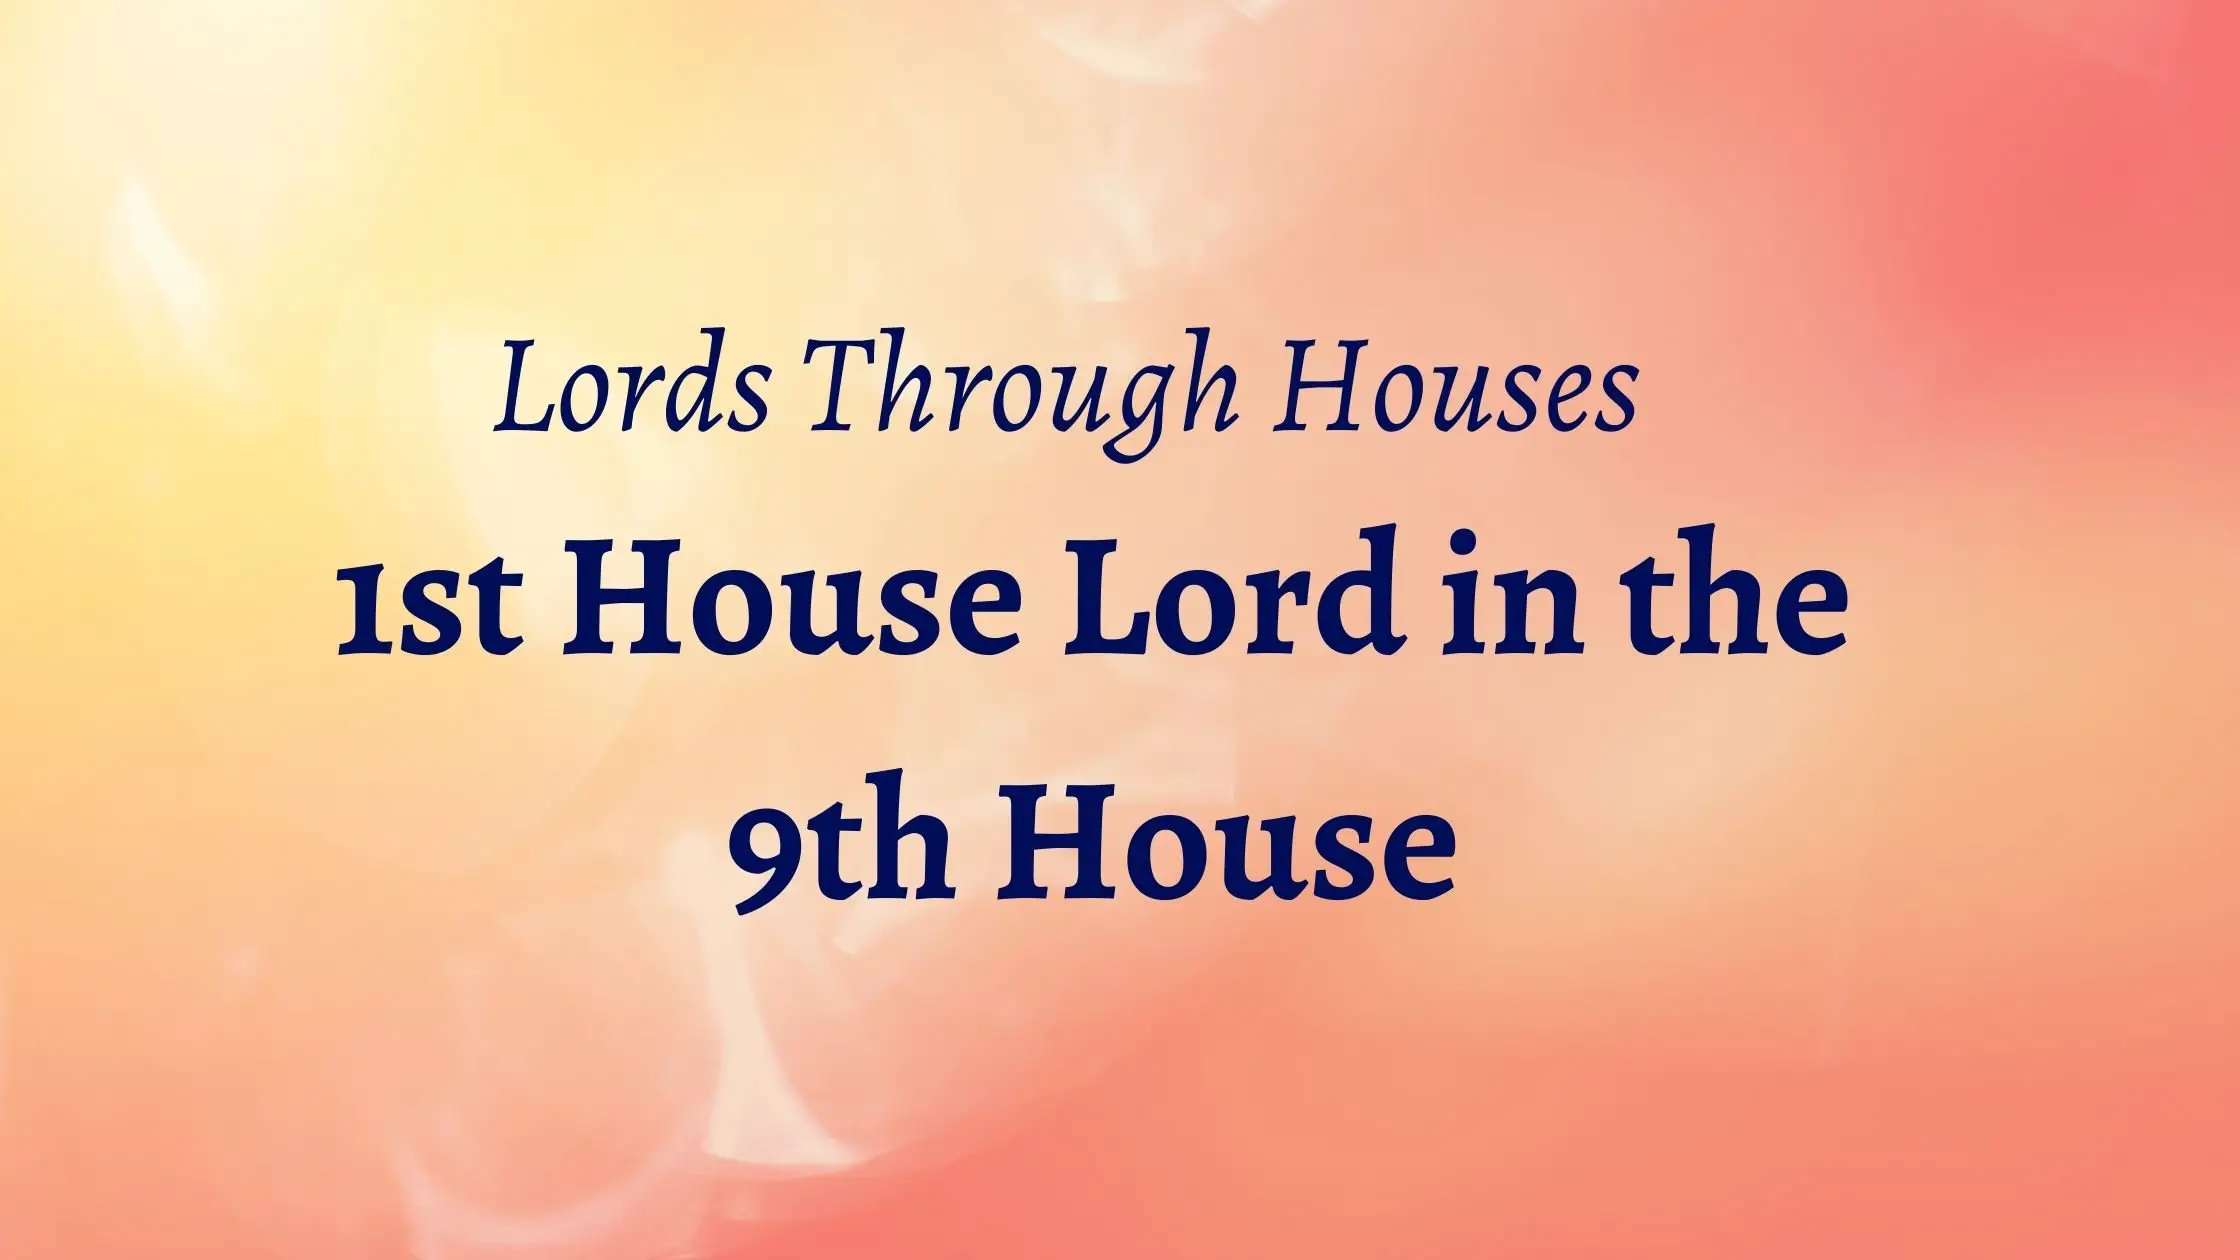 1st house lord in the 9th house